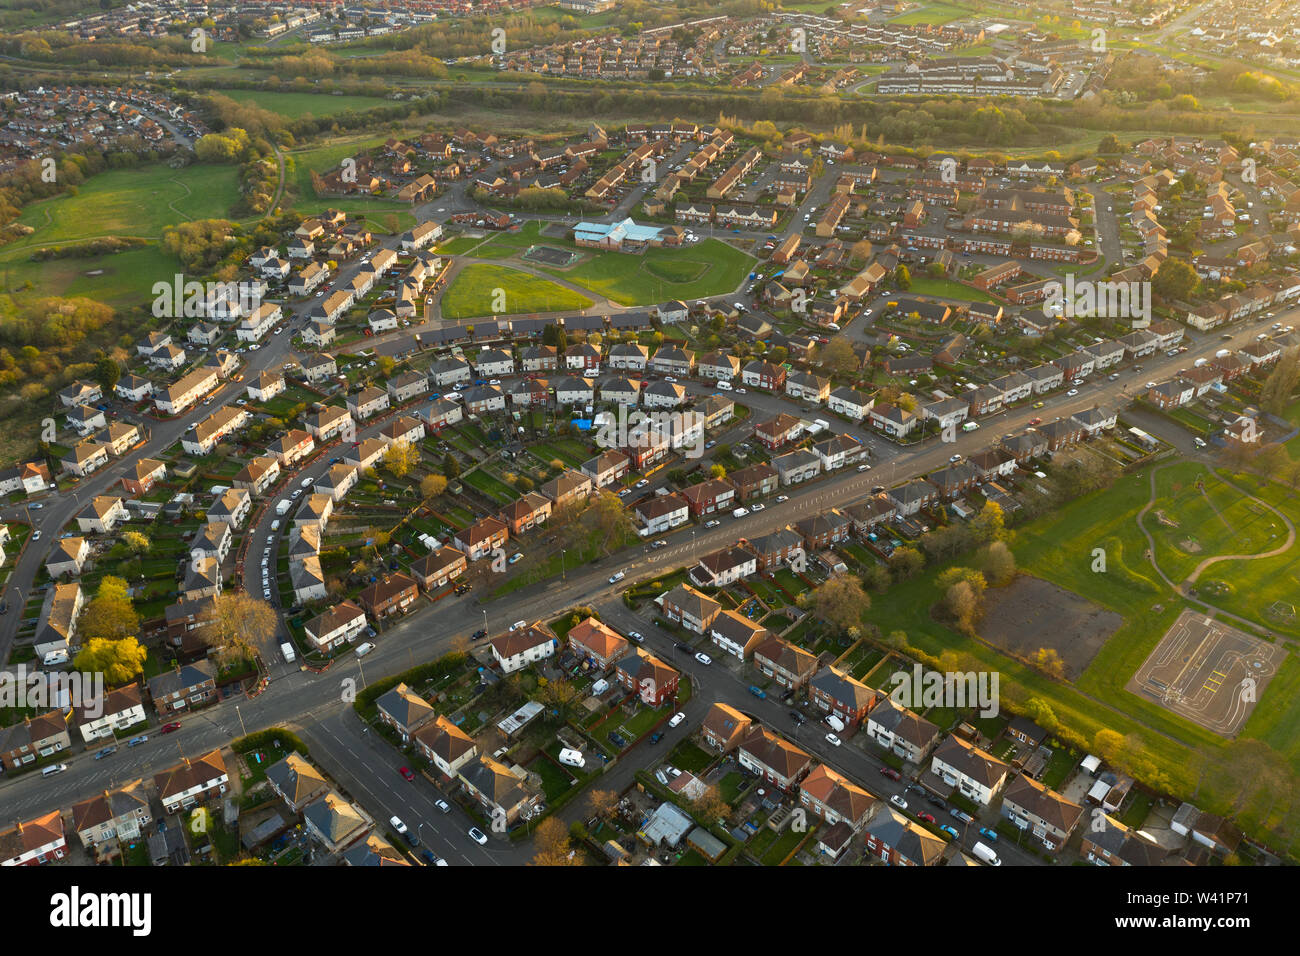 Looking down onto a typical British housing estate based in the Norton area of Stockton-on-Tees, Teesside, England, during sunset in Summertime. Stock Photo